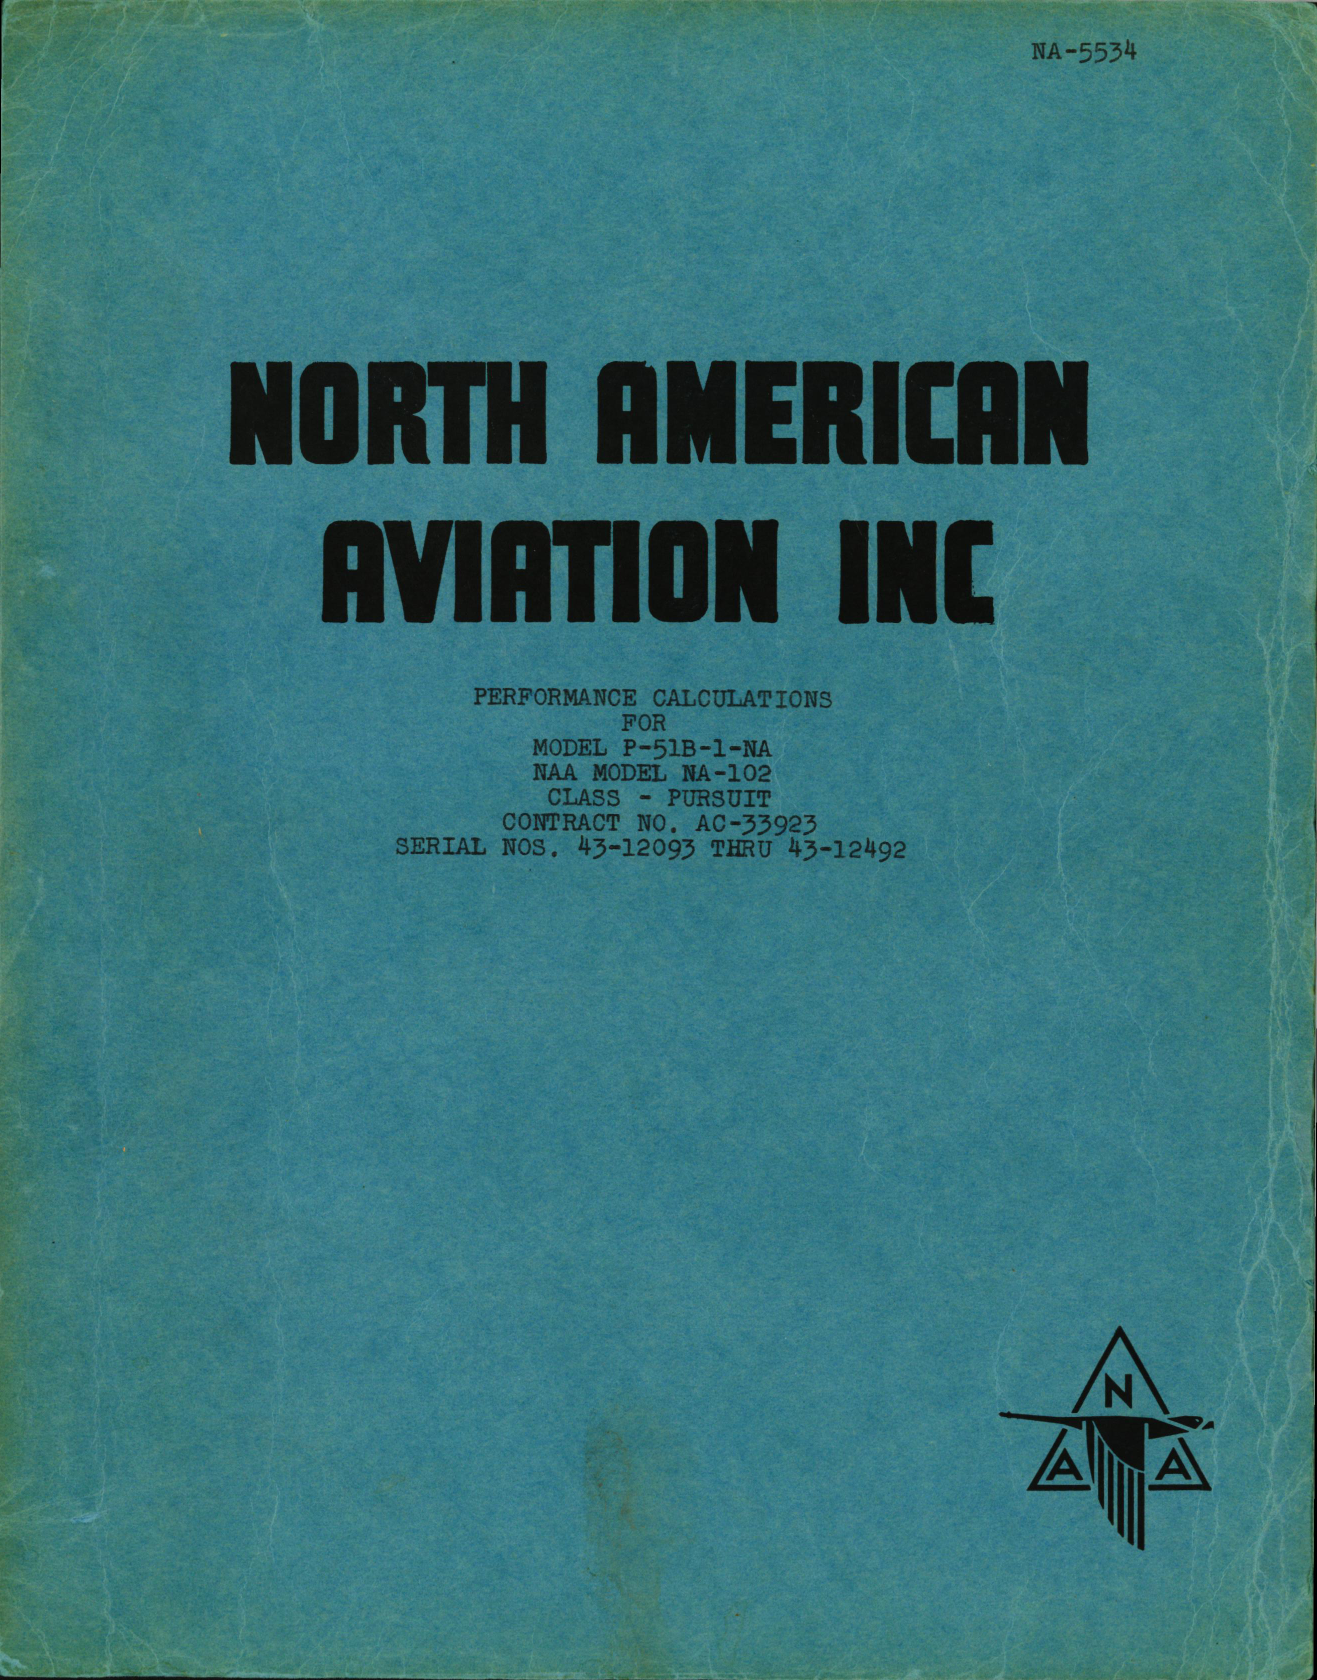 Sample page 1 from AirCorps Library document: Performance Calculations for P-51B-1-NA (North American Engineering Dept)